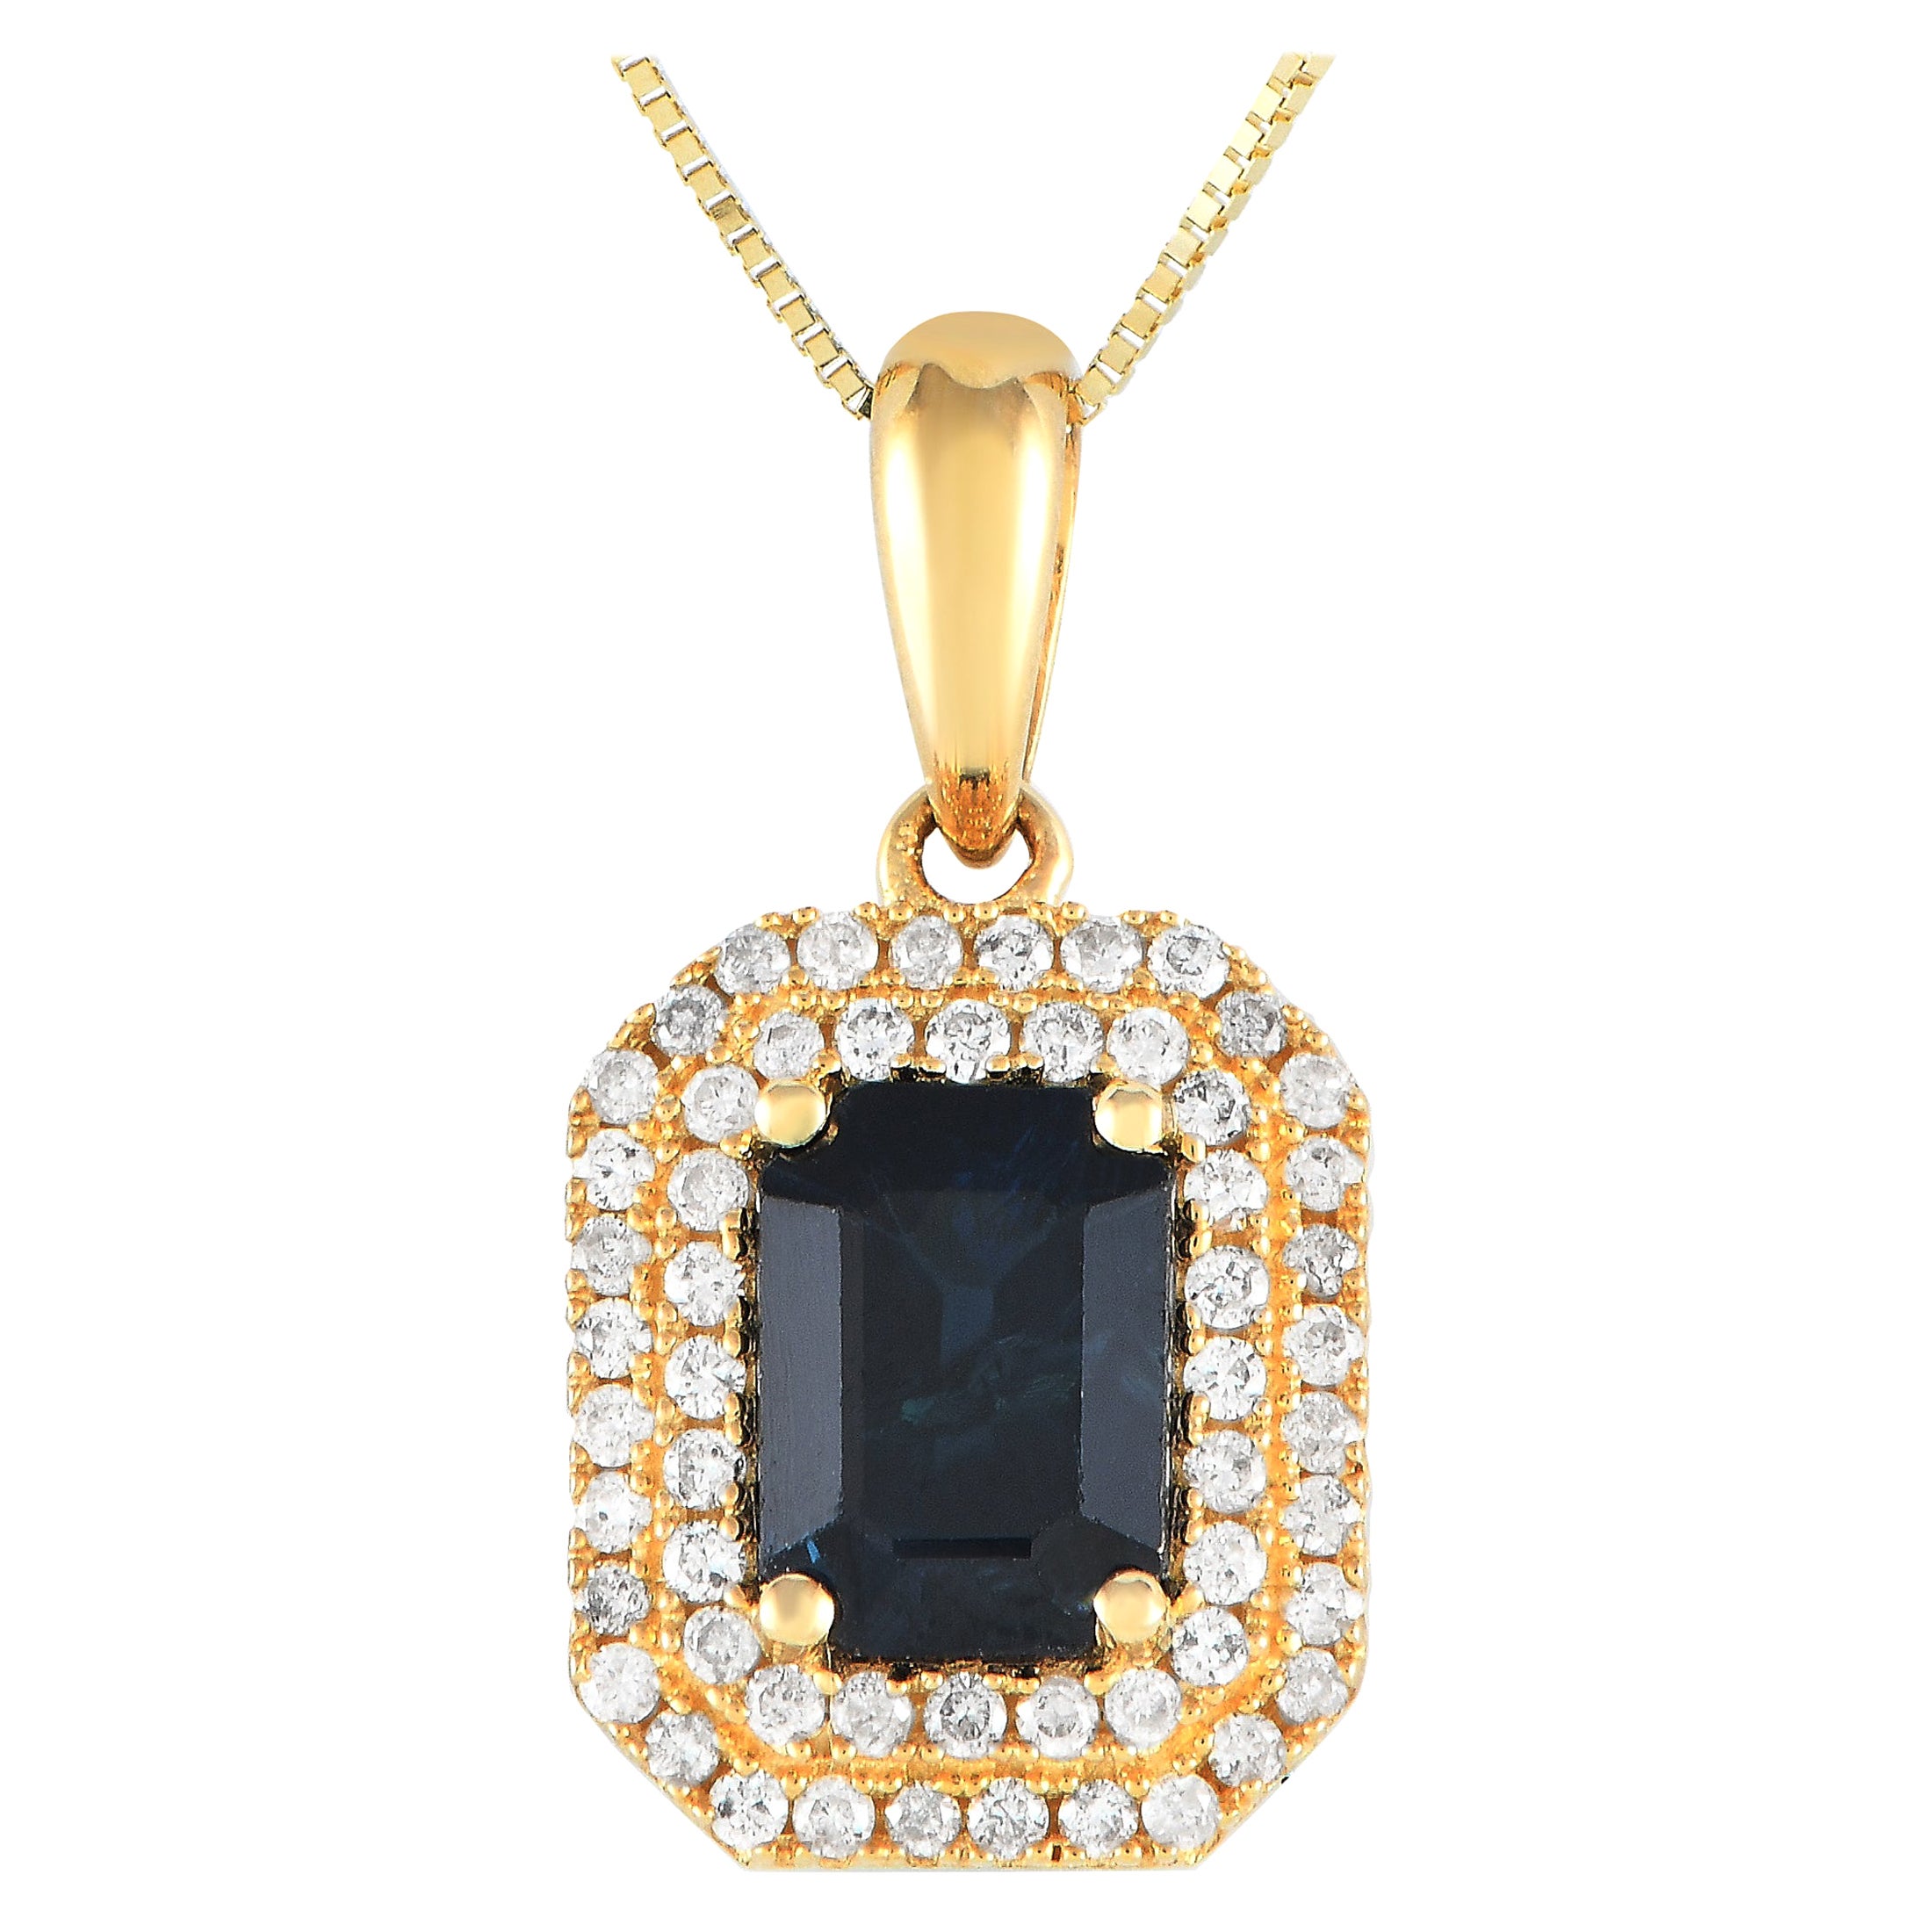 LB Exclusive 14K Yellow Gold 0.24ct Diamond Pendant Necklace PD4-15905YSA For Sale